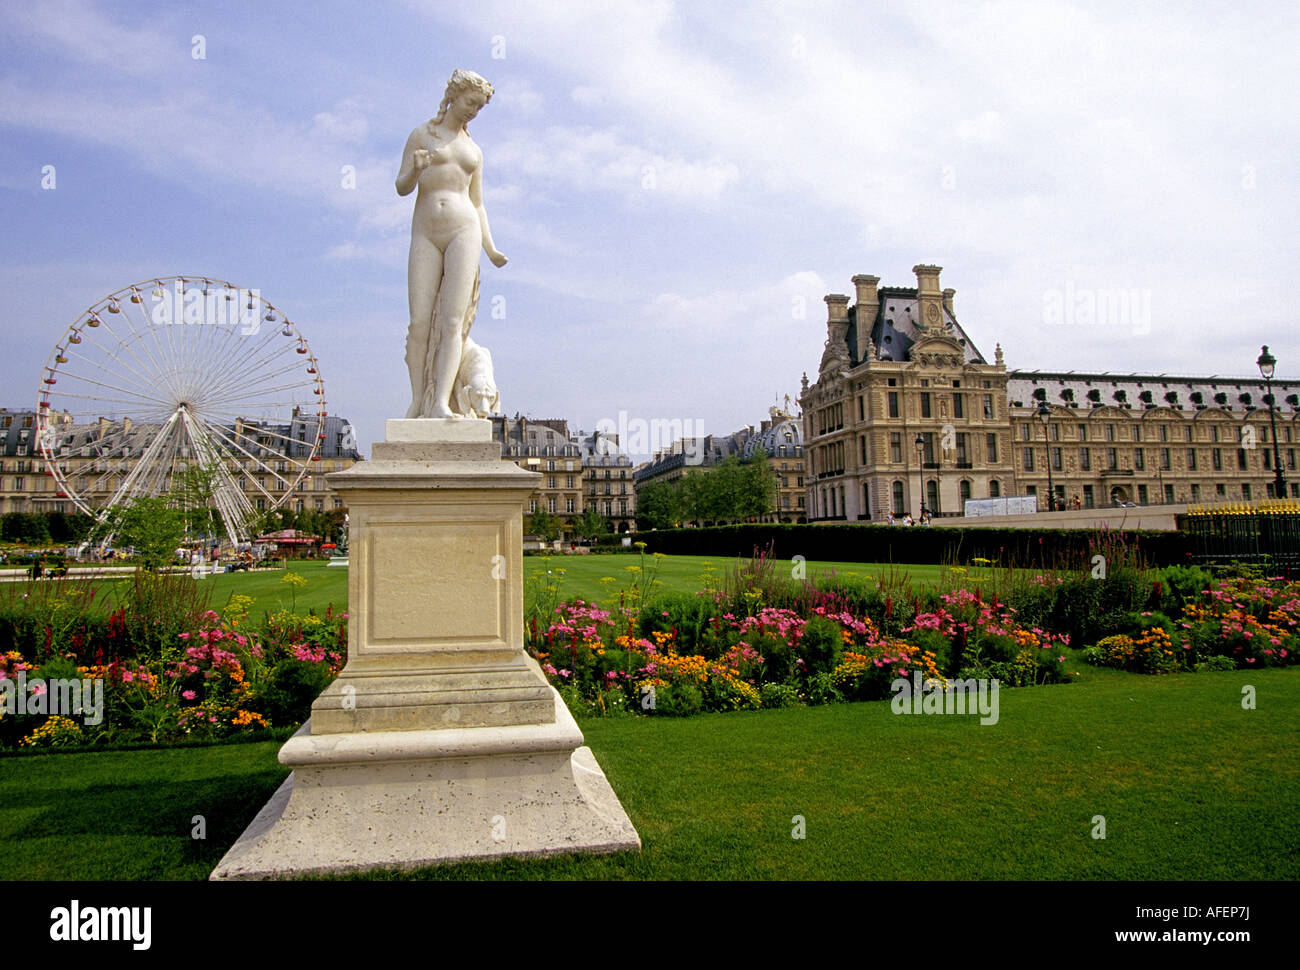 A view of the Tuileries Gardens along the Seine River in downtown Paris, France. Stock Photo